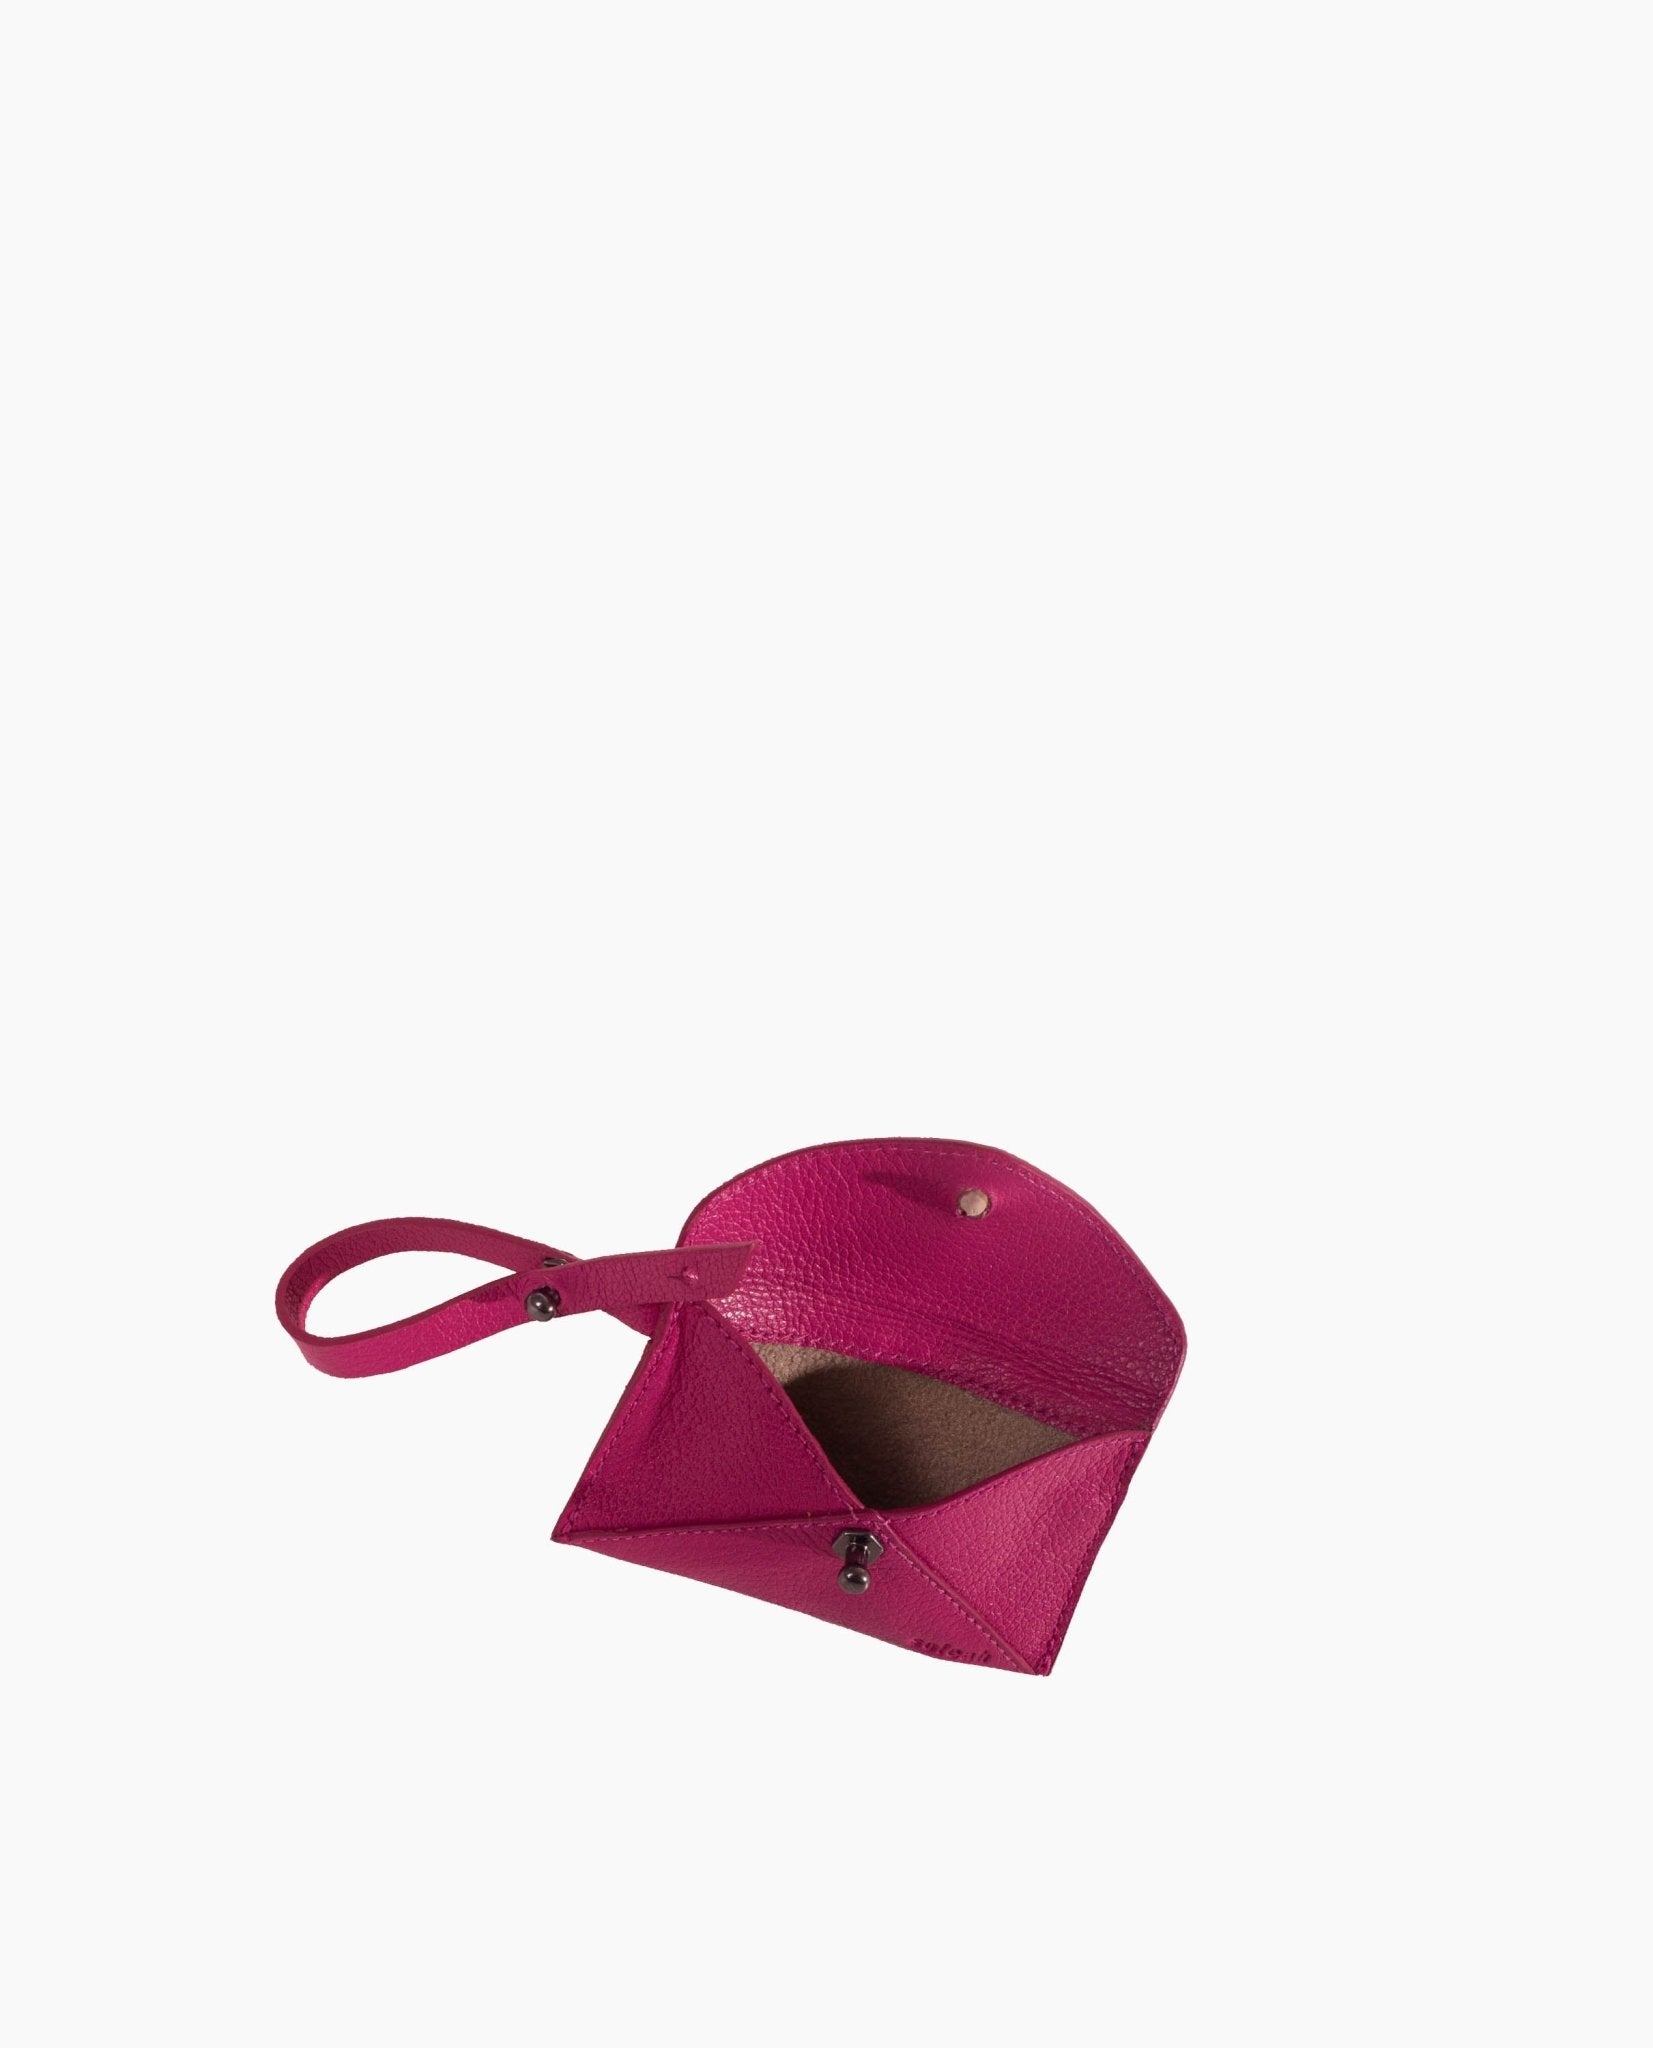 CHAVEIRO CHARM ENVELOPE ROSA PINK LADY | Soleah